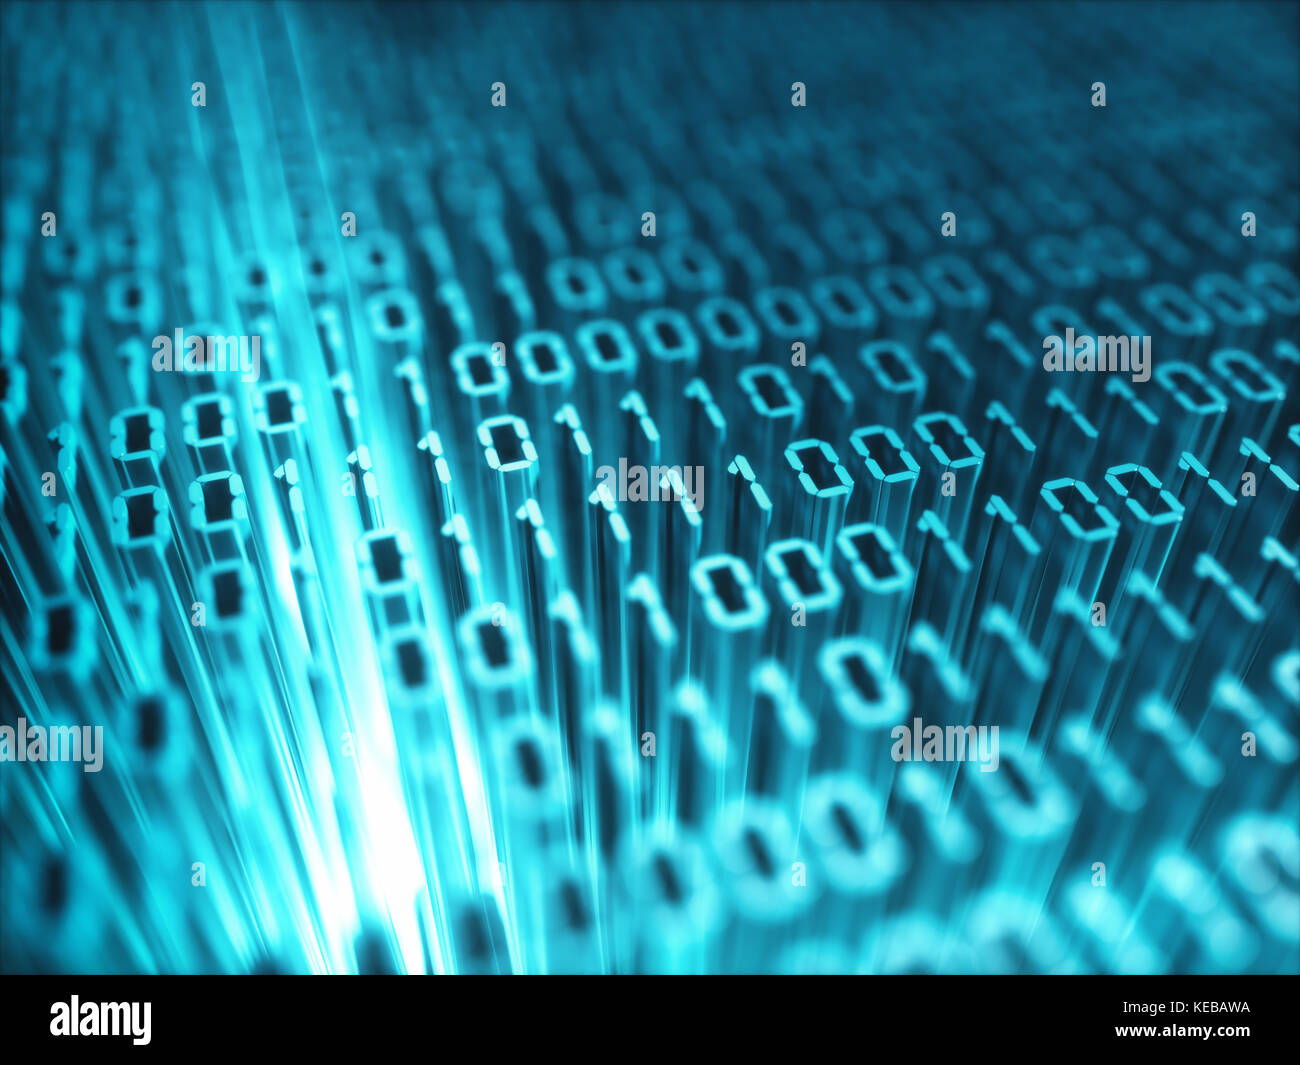 Binary numbers, zeros and ones in the concept of program codes and mobile applications. Stock Photo